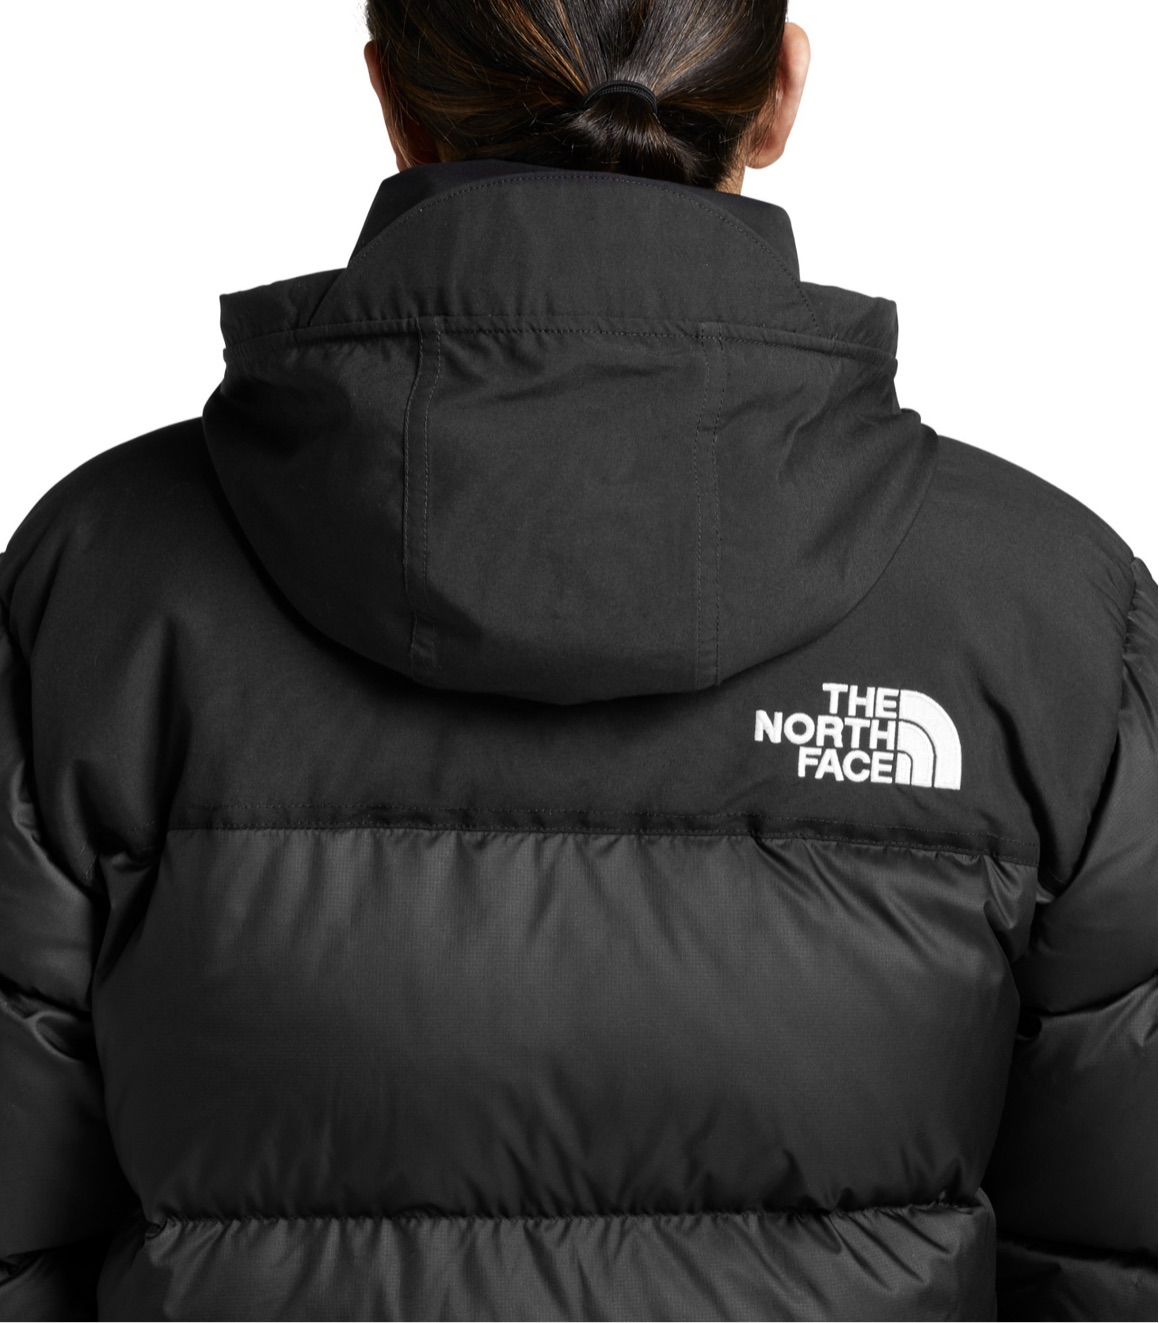 Vintage The North Face Eco Nuptse Down Jacket - Women's Size